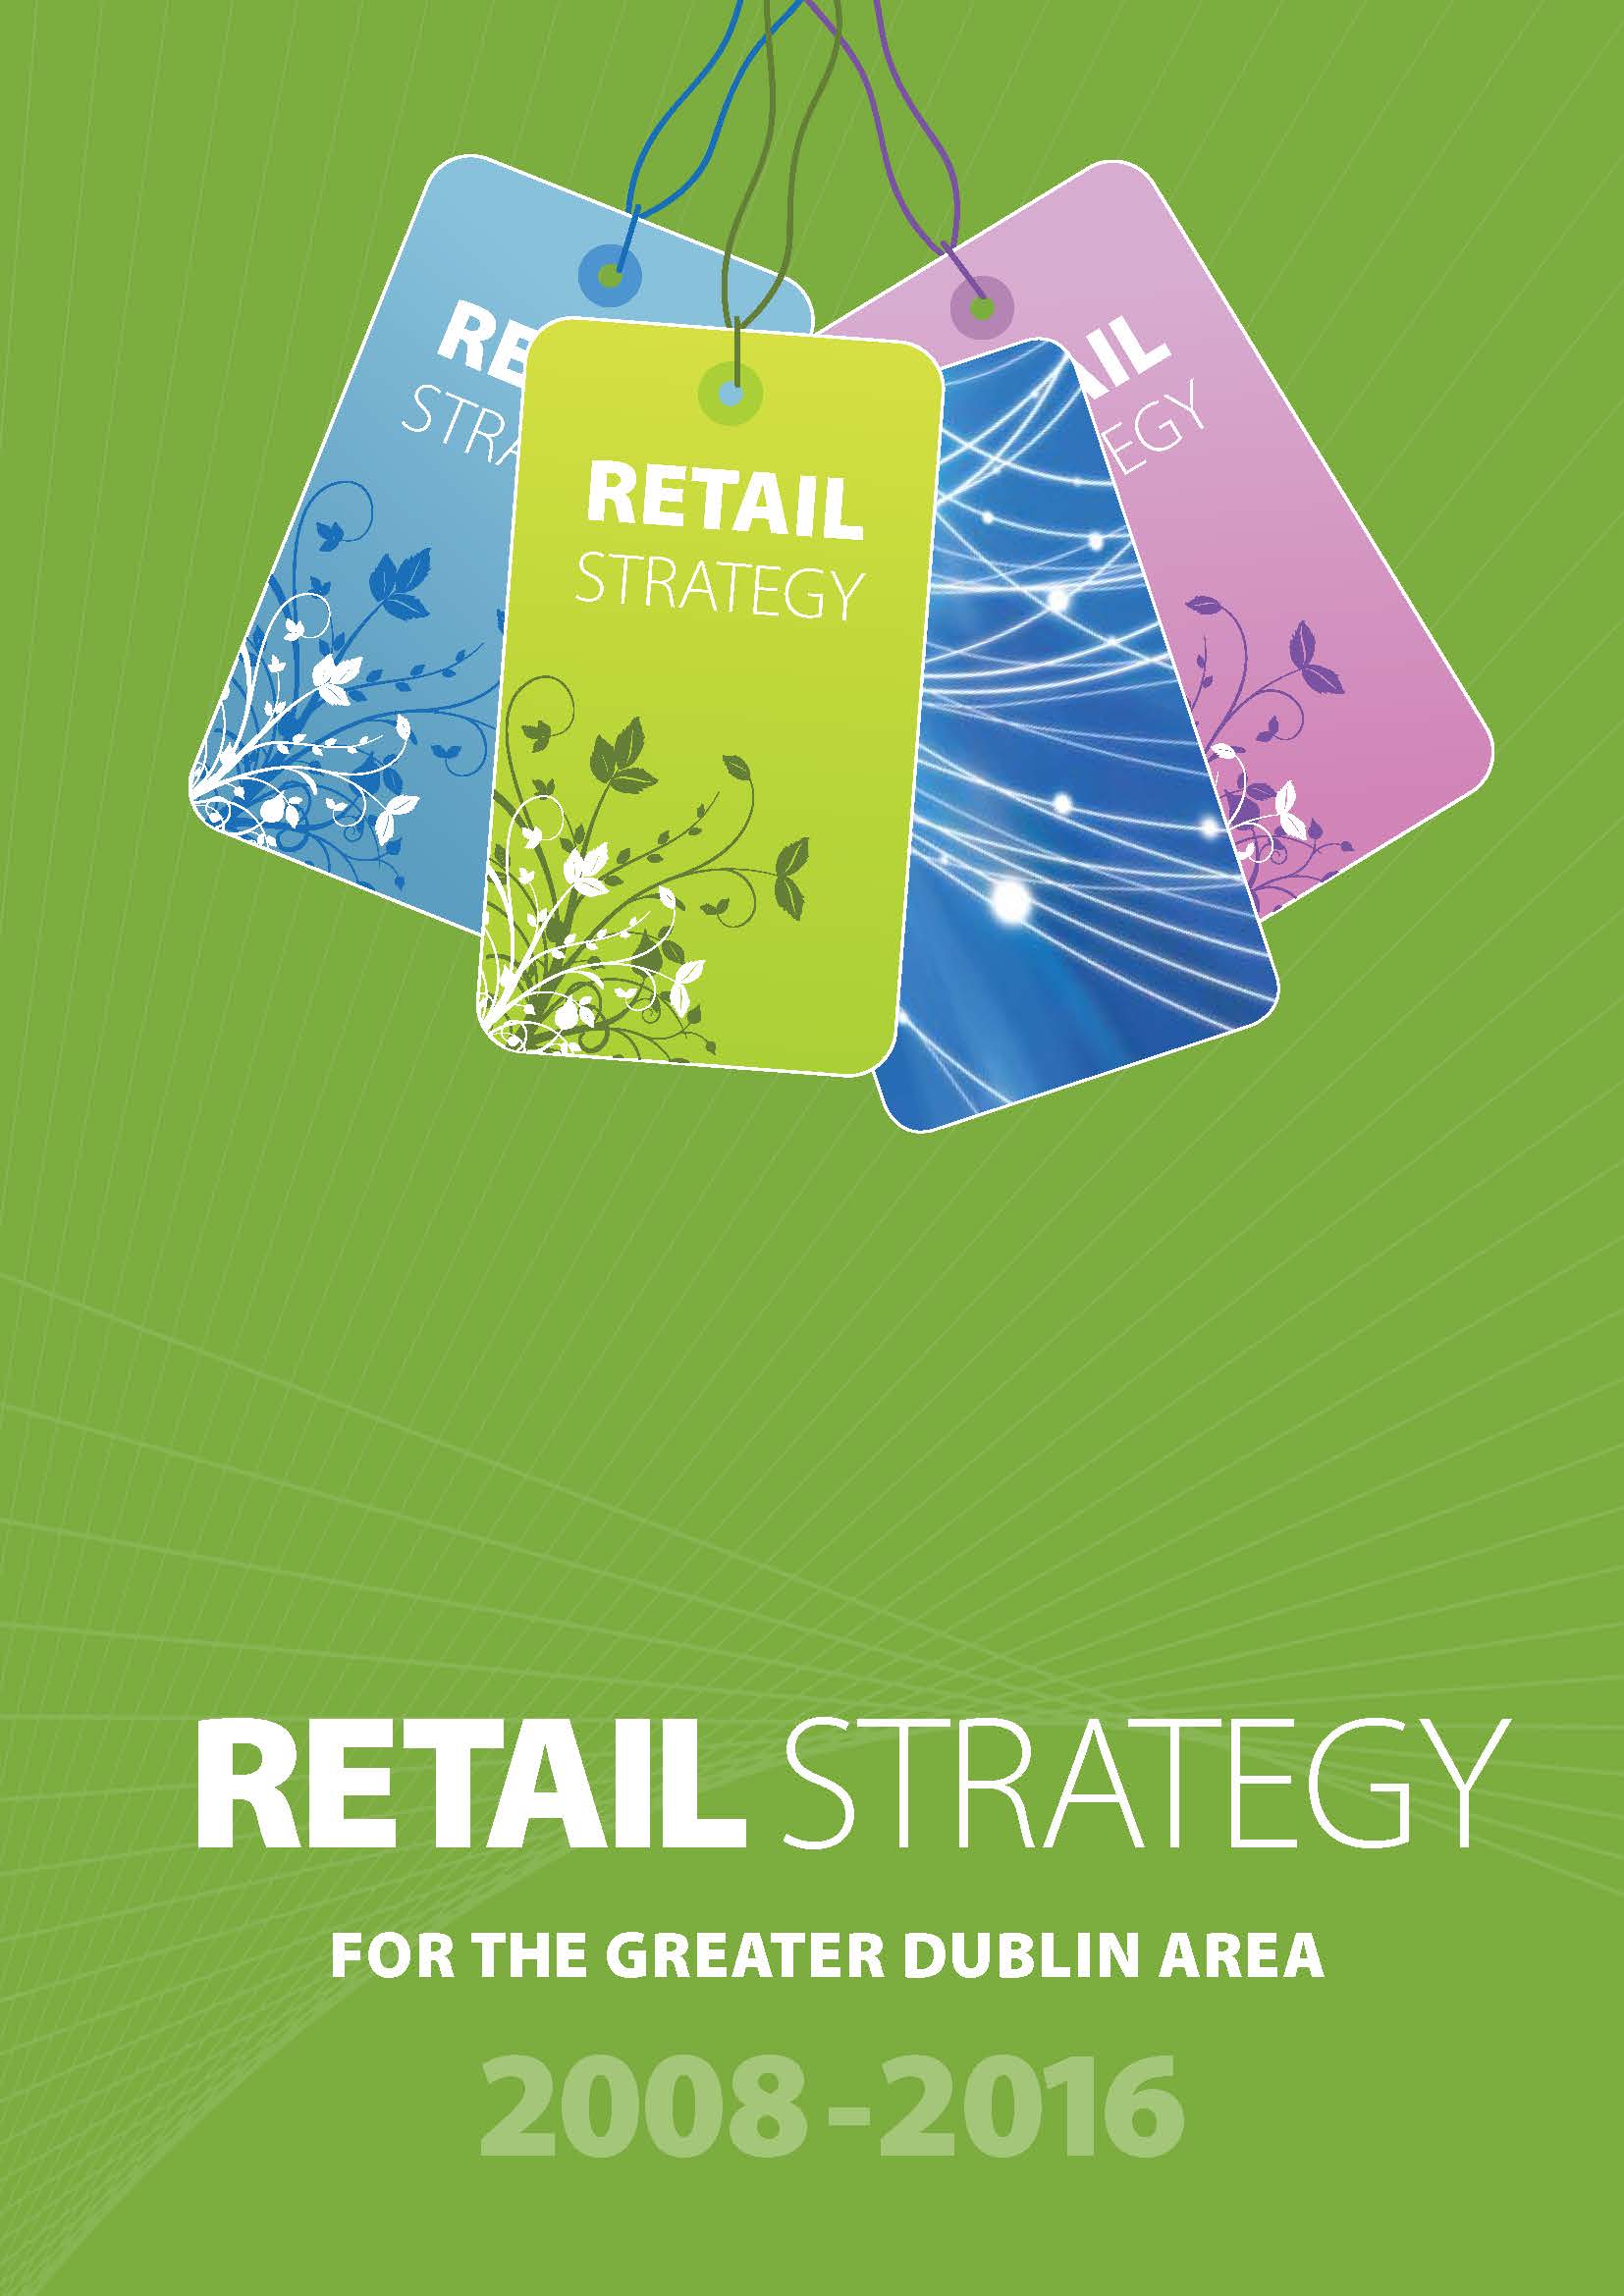 Greater-Dublin-Area-Retail-Strategy-2008-2016 pic